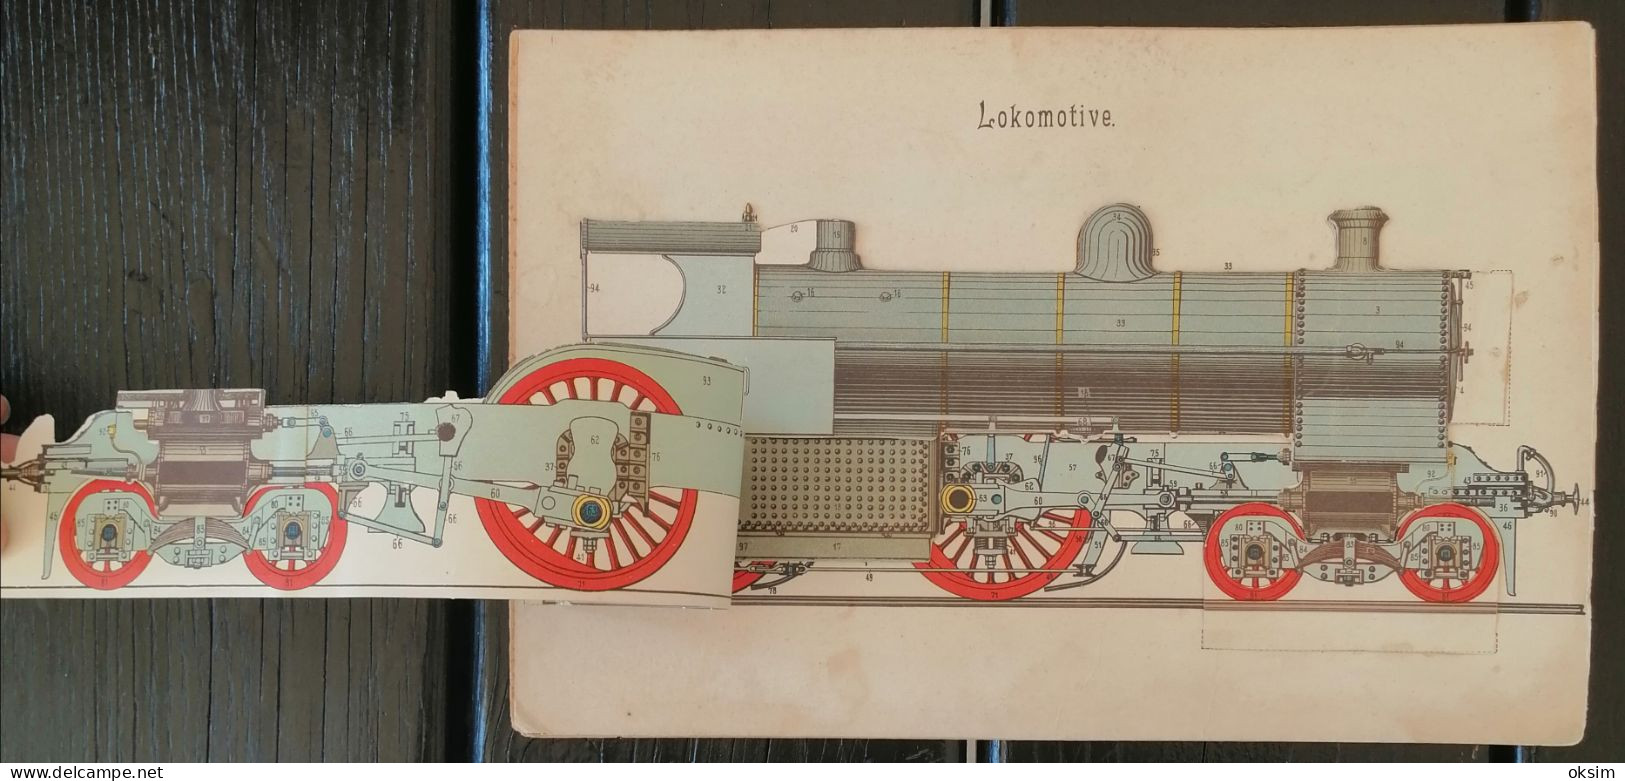 Drawings Of Machinery In Colour, Consisting Of Several Layers That Can Be Unfolded To Show The Interior Of The Machines - Máquinas